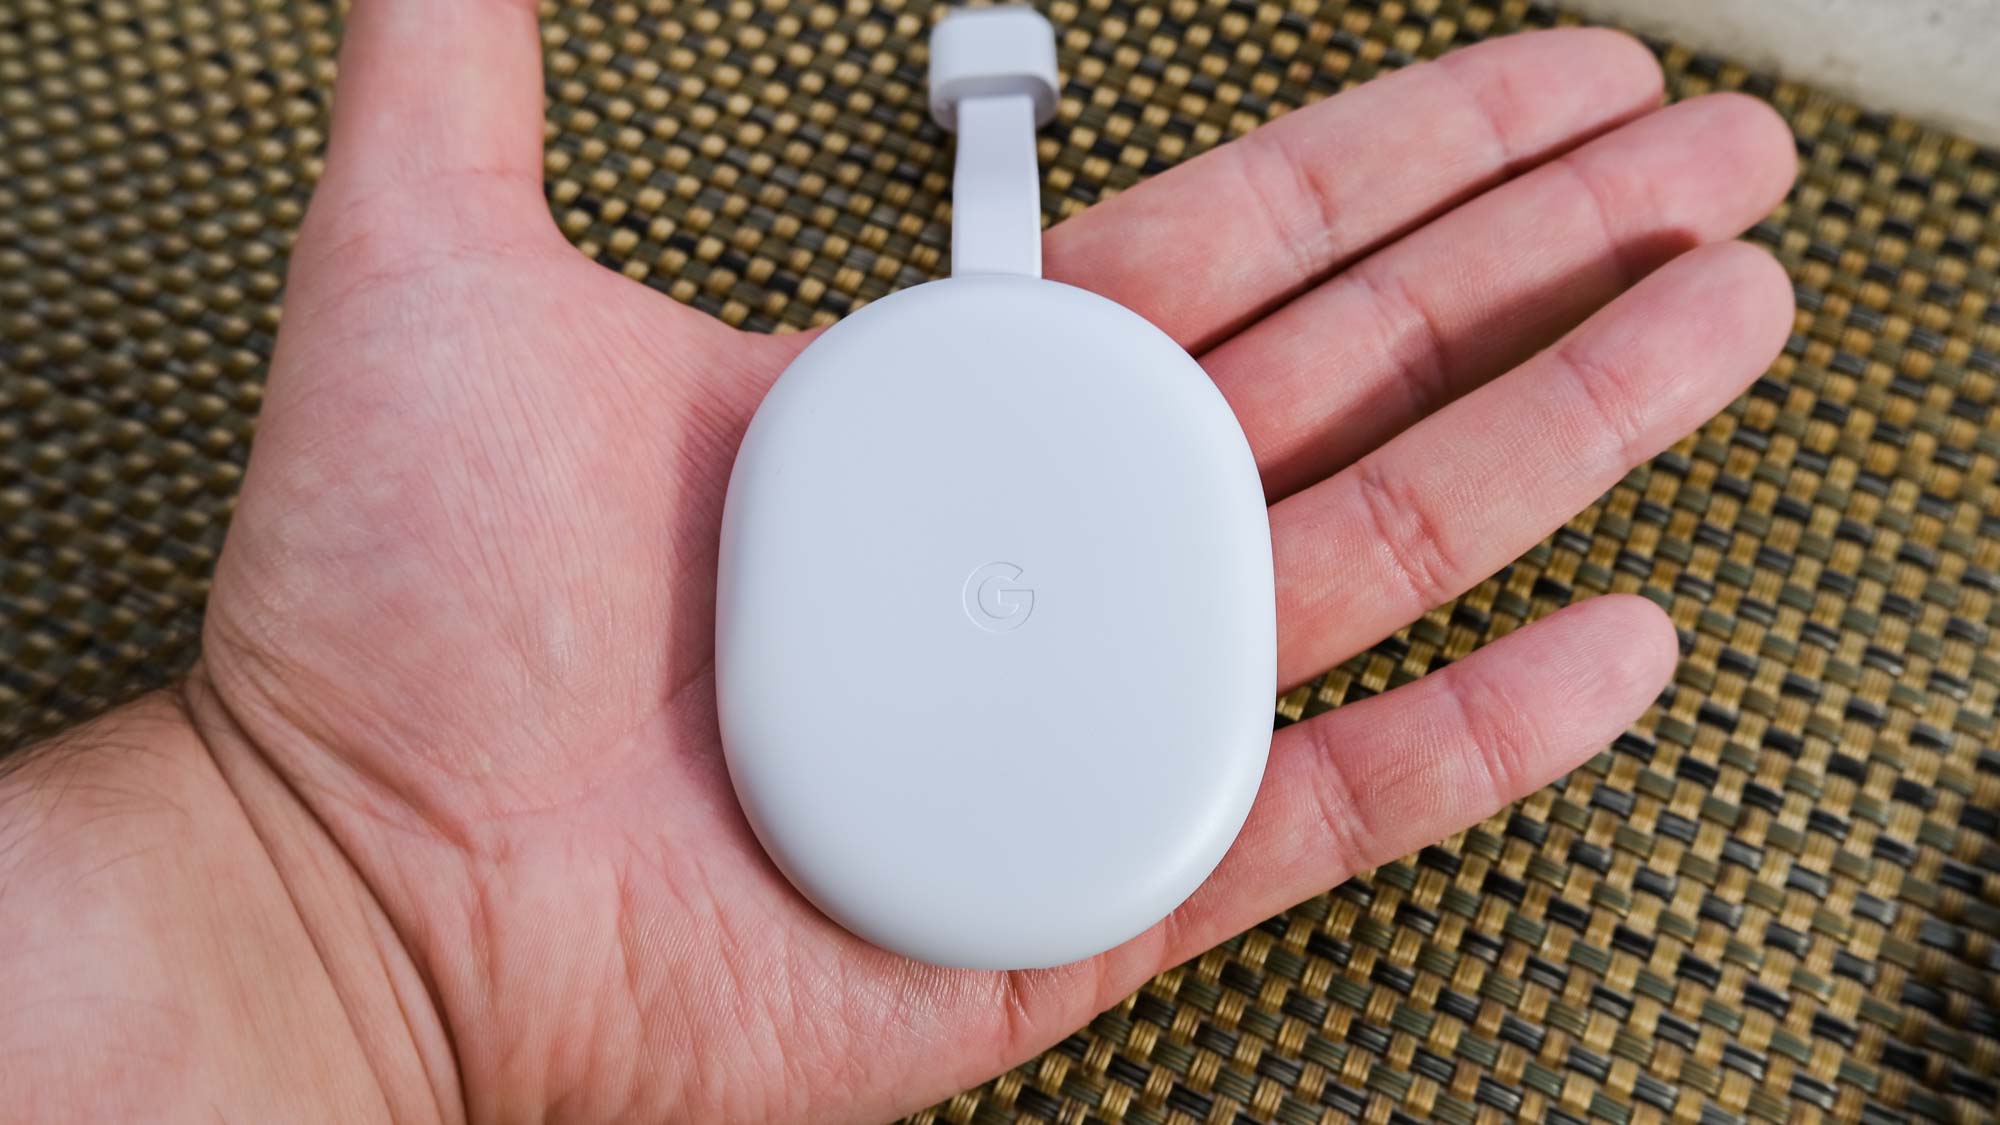 Factory reset Chromecast and set up again
Restart Android device after factory reset